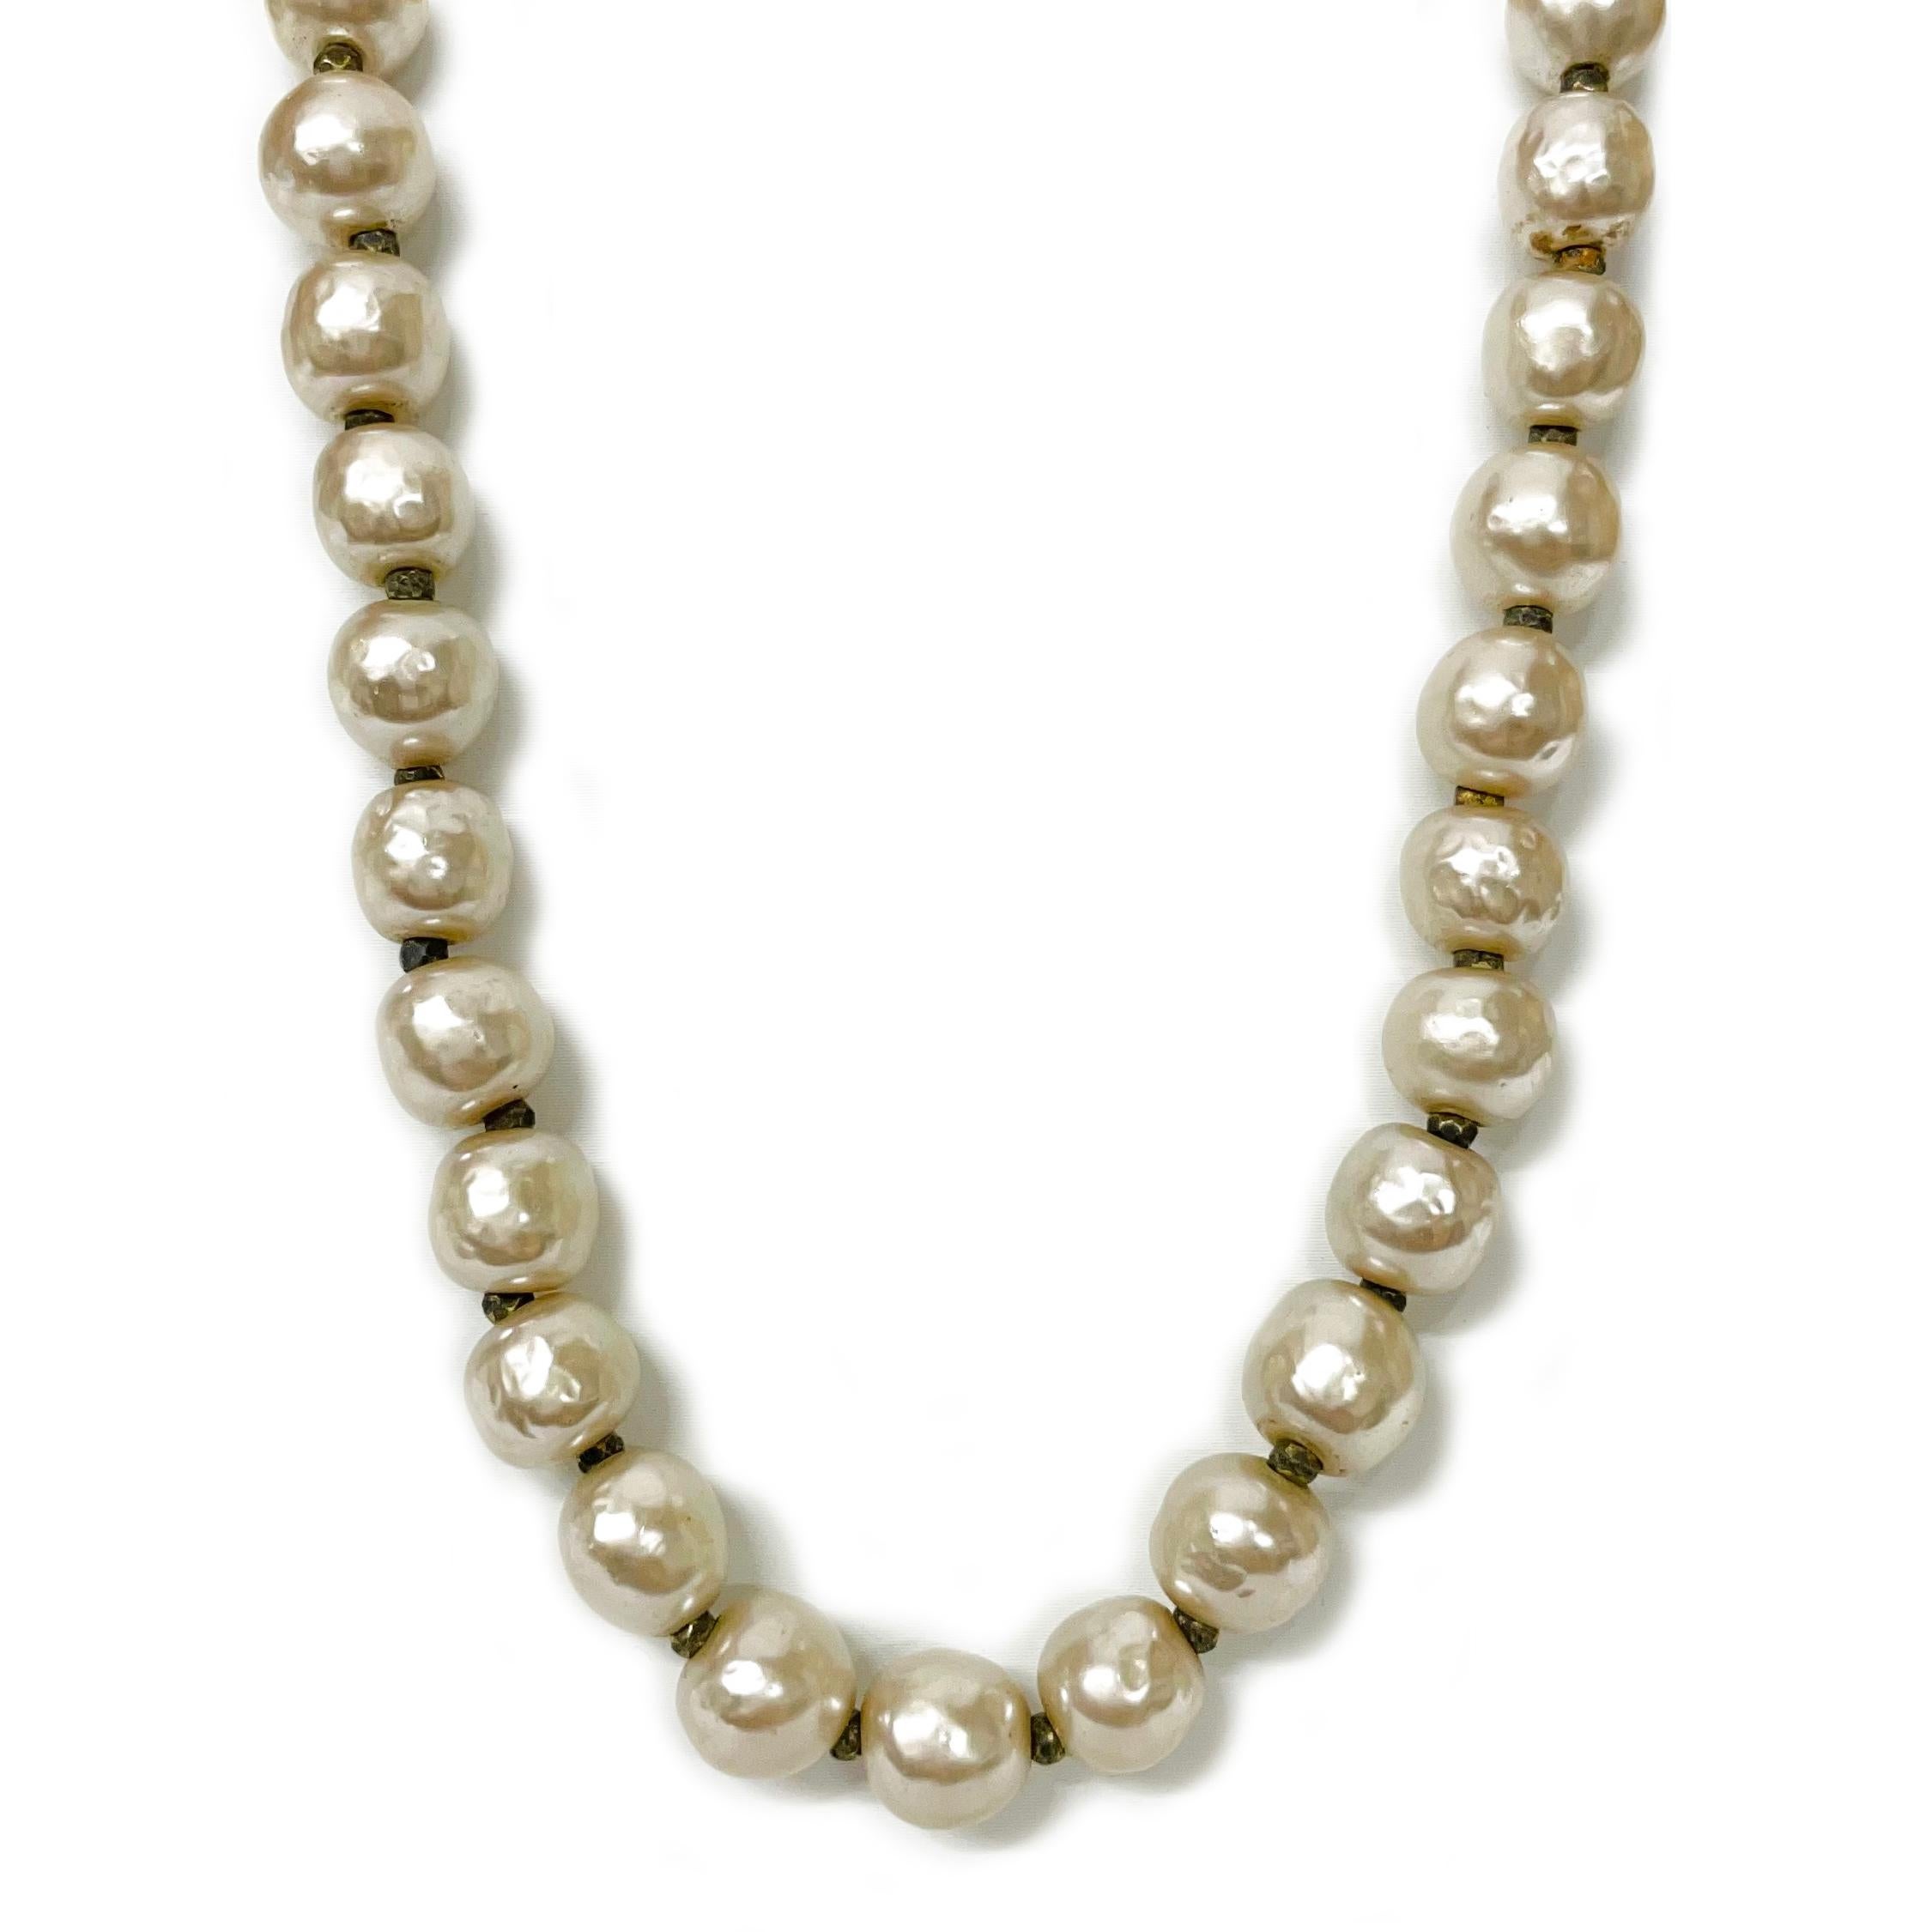 Miriam Haskell Baroque Faux Pearl Necklace. This vintage necklace features a single strand of Baroque faux pearls ranging in size from 8 - 9mm. The clasp has a round box closure and the designer's name Miriam Haskell on the clasp. Adorning the top